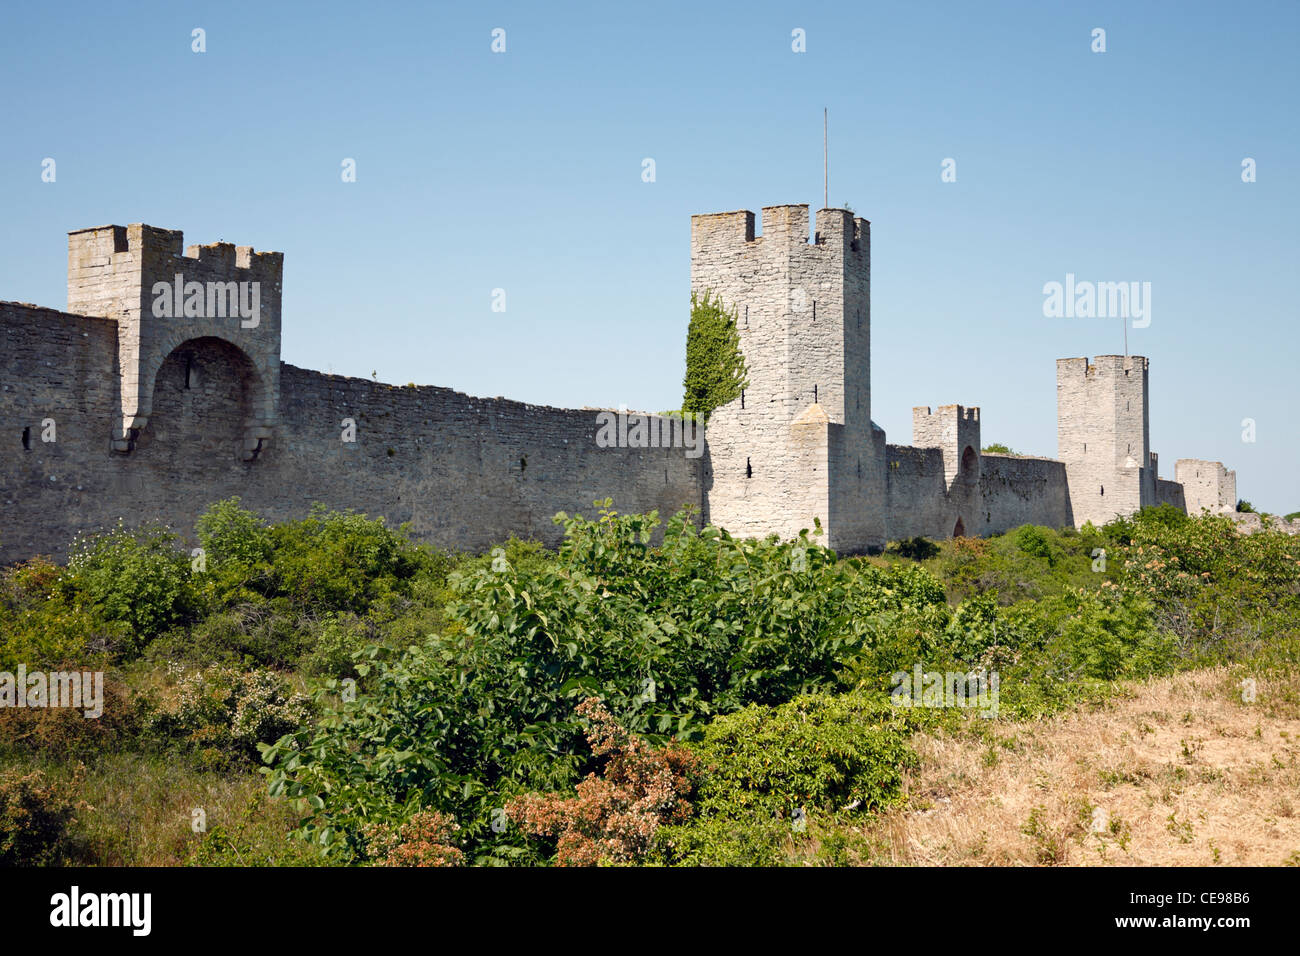 The city wall, the medieval city ring wall with towers around the medieval Hanseatic city Visby on the Swedish island Gotland in the Baltic Sea. Stock Photo